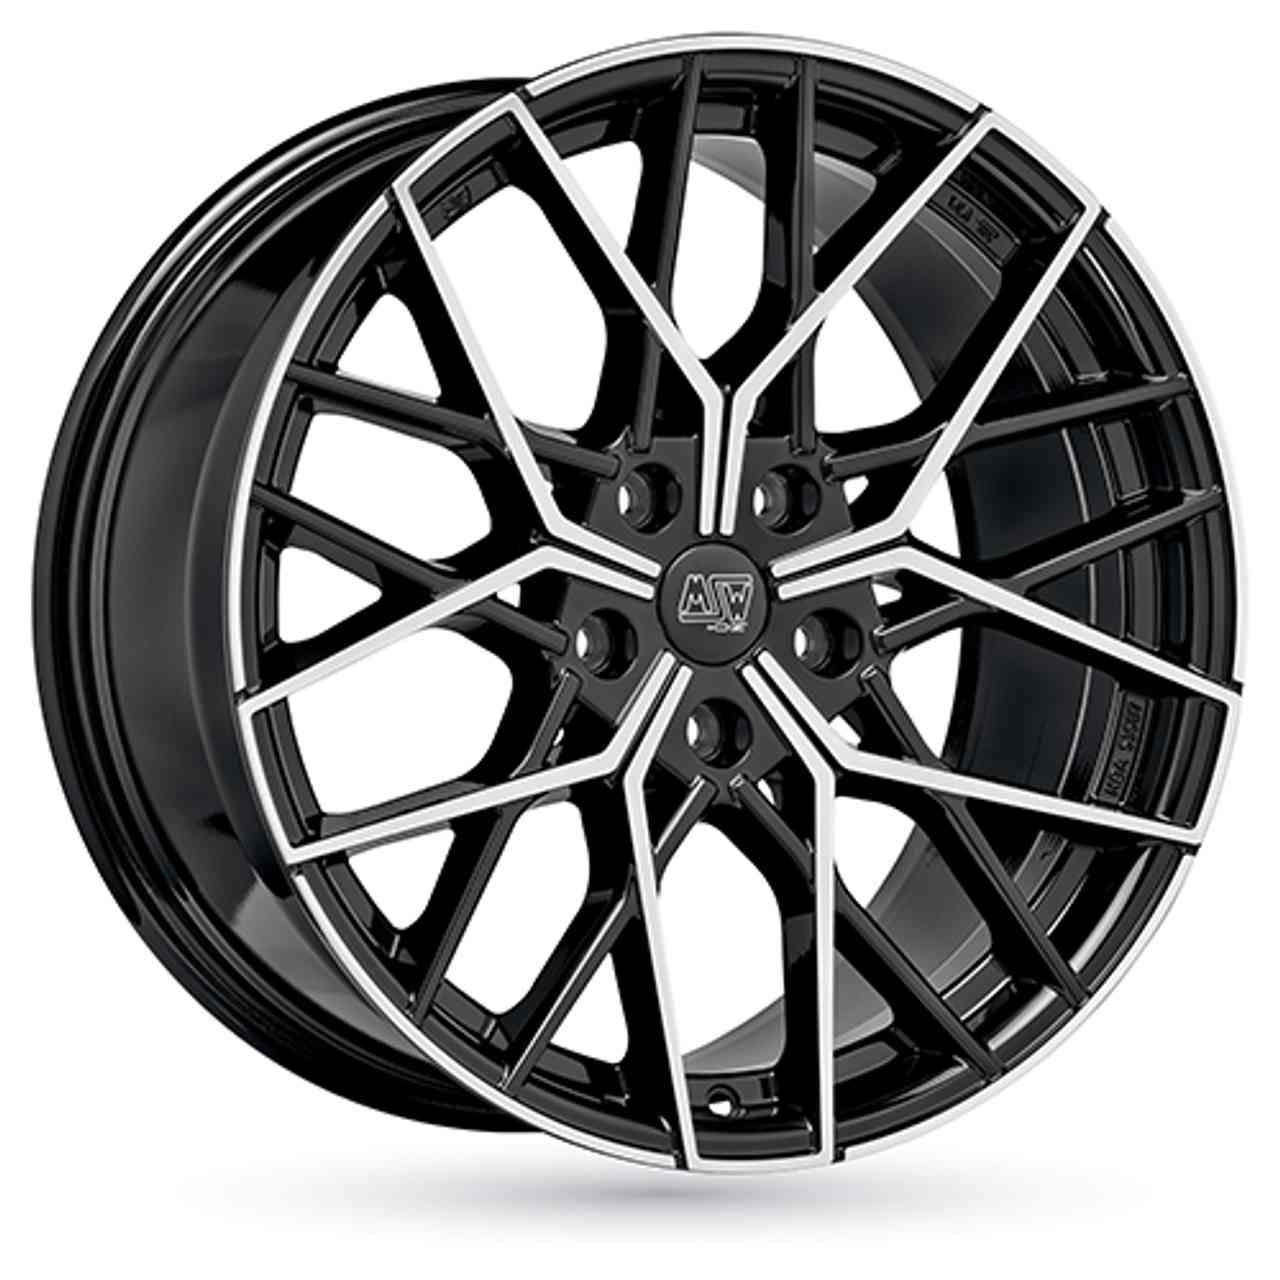 MSW (OZ) MSW 74 gloss black full polished 8.5Jx19 5x112 ET40